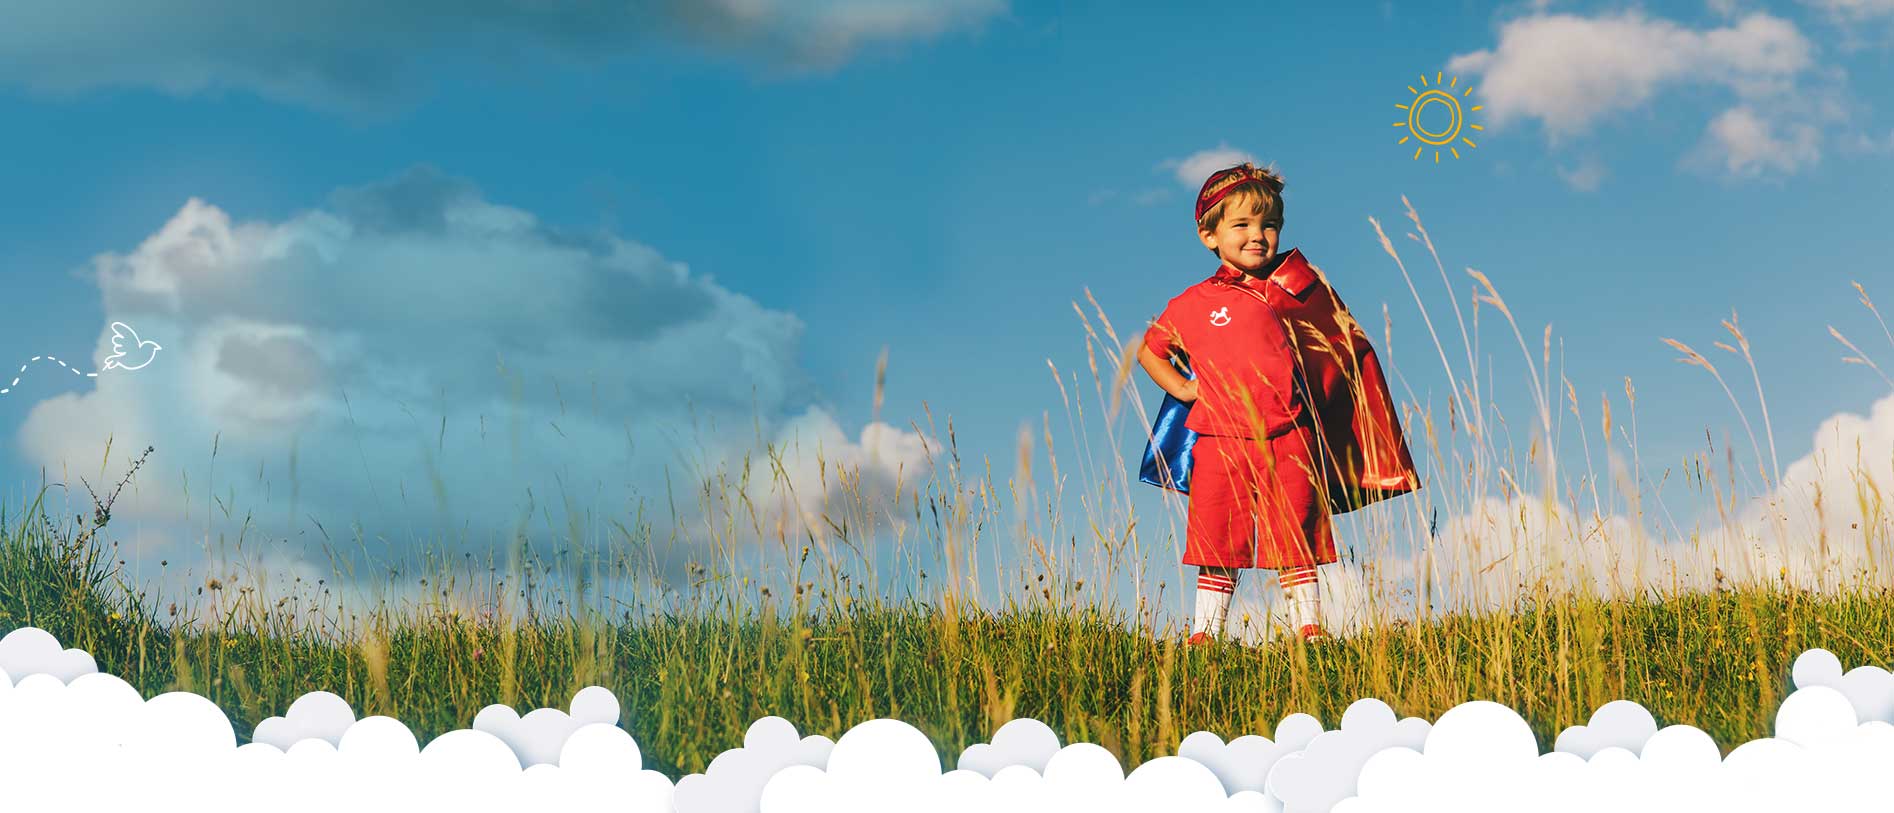 A boy standing in a field wearing a red tshirt, shorts and cape in a super hero pose